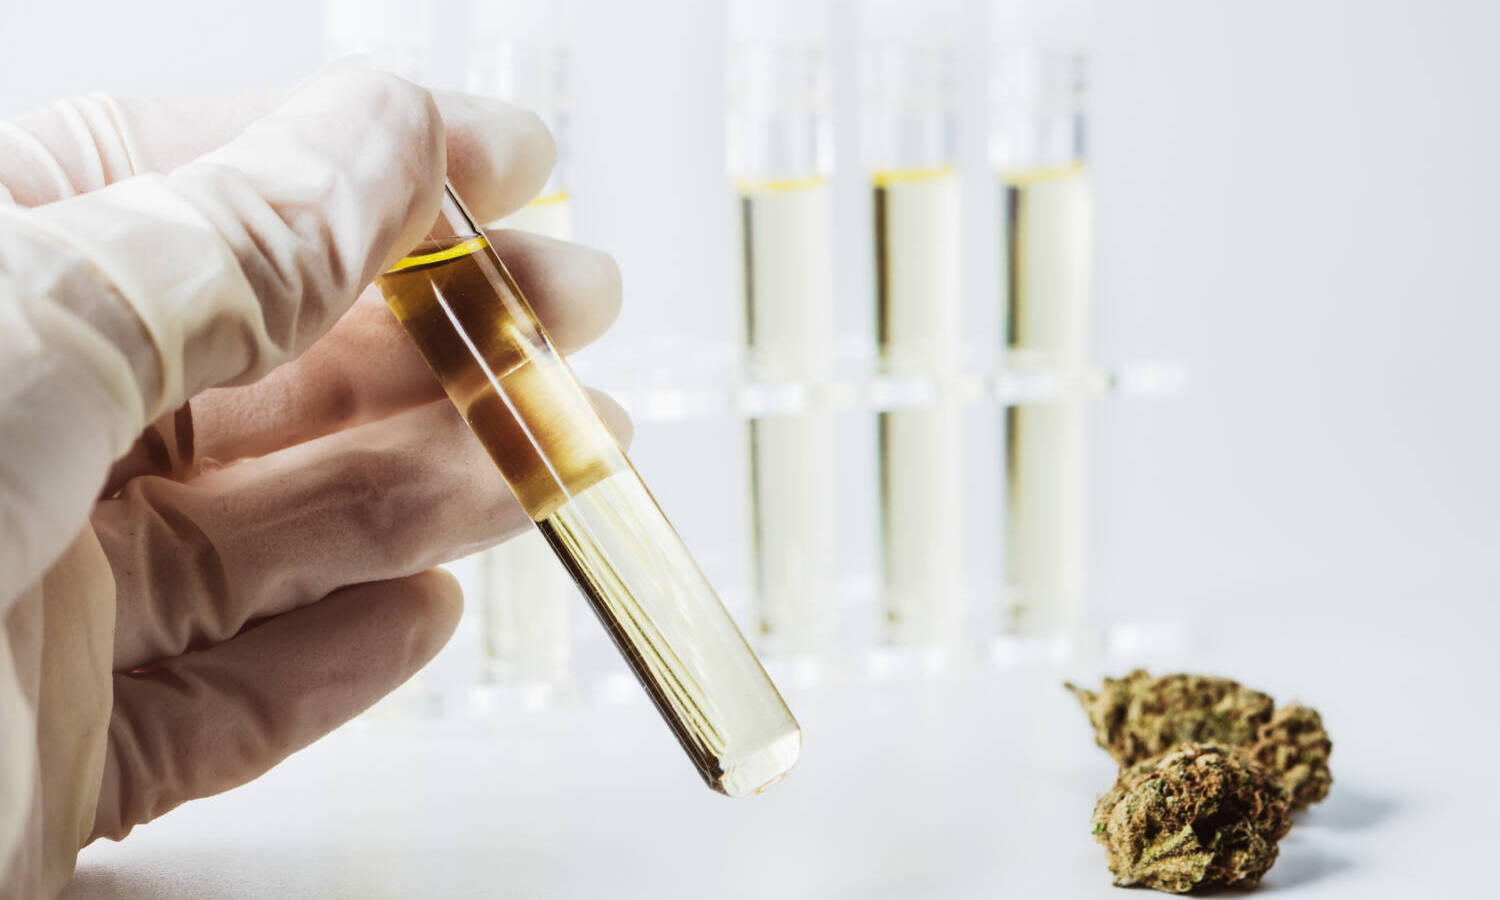 Why The Cannabis Industry Needs More Stringent Testing